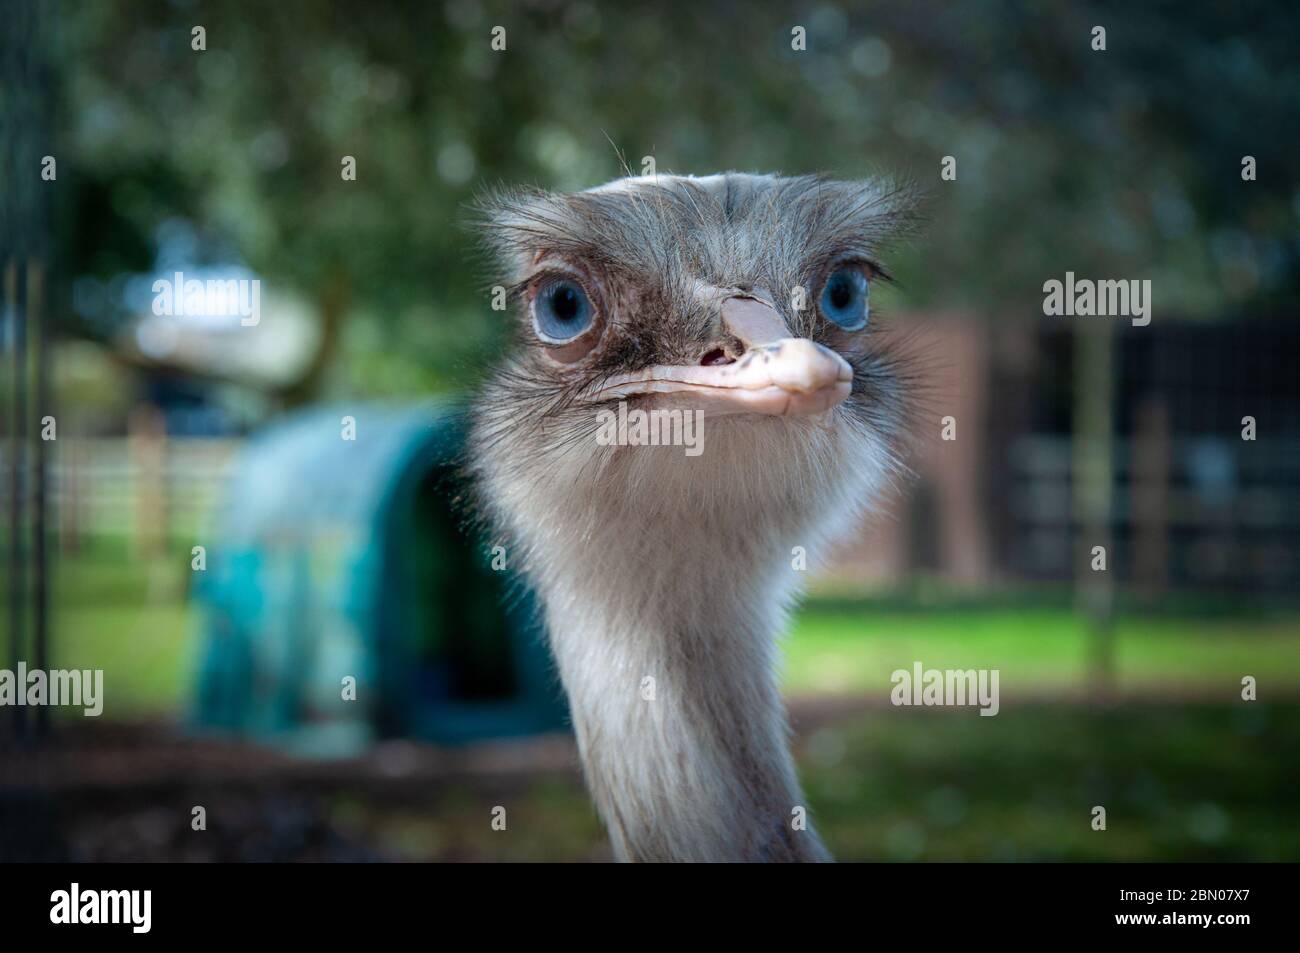 Closeup portrait of the head of a big blue eyed Rhea flightless bird, similar to Ostrich and Emu, at Tattershall Farm Park in Lincolnshire UK Stock Photo